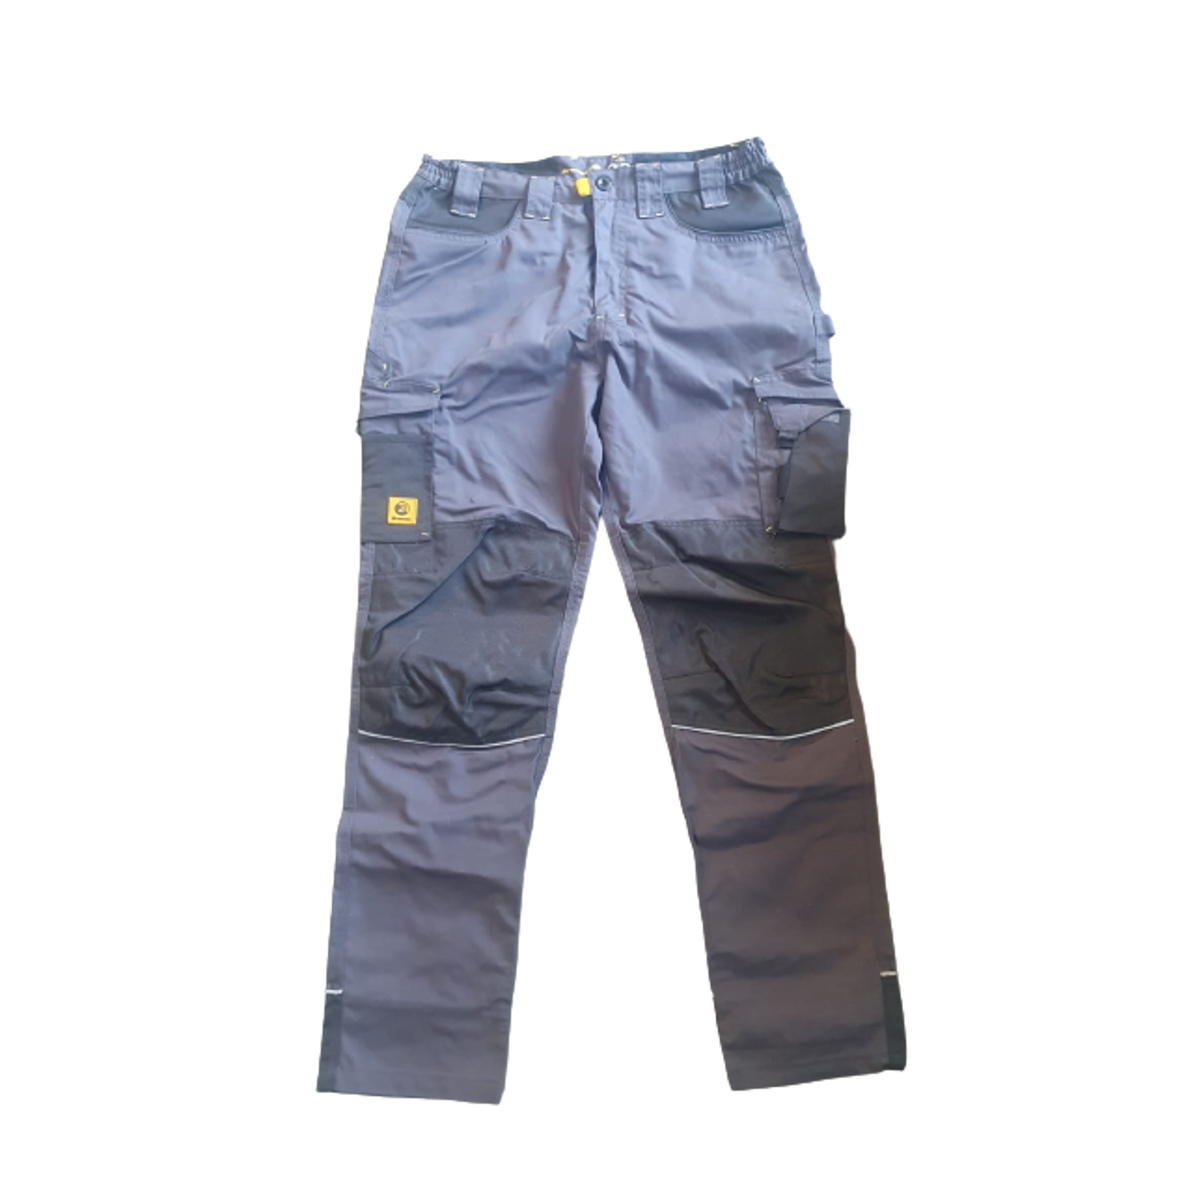 Dromex Utility Pants - Carbon | Buy Online in South Africa | takealot.com